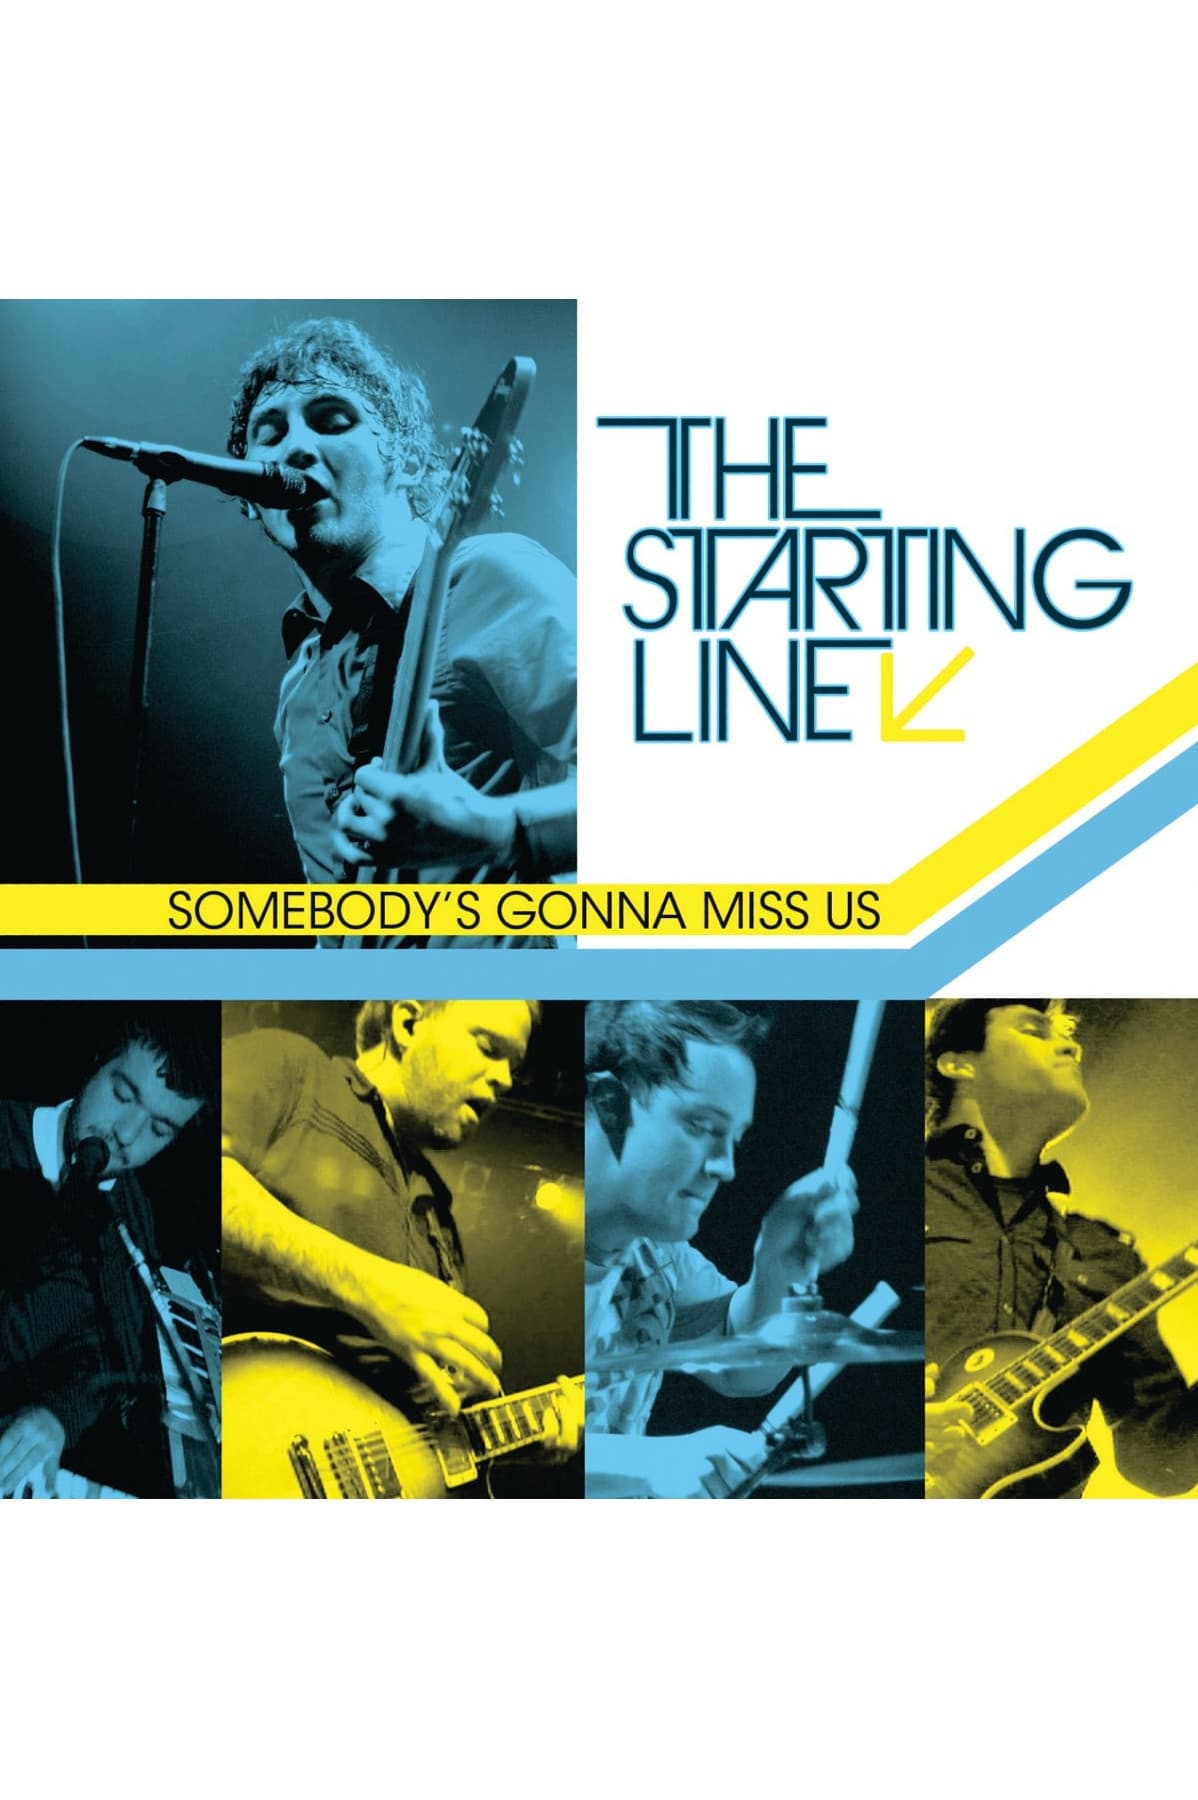 The Starting Line - Somebody’s Gonna Miss Us